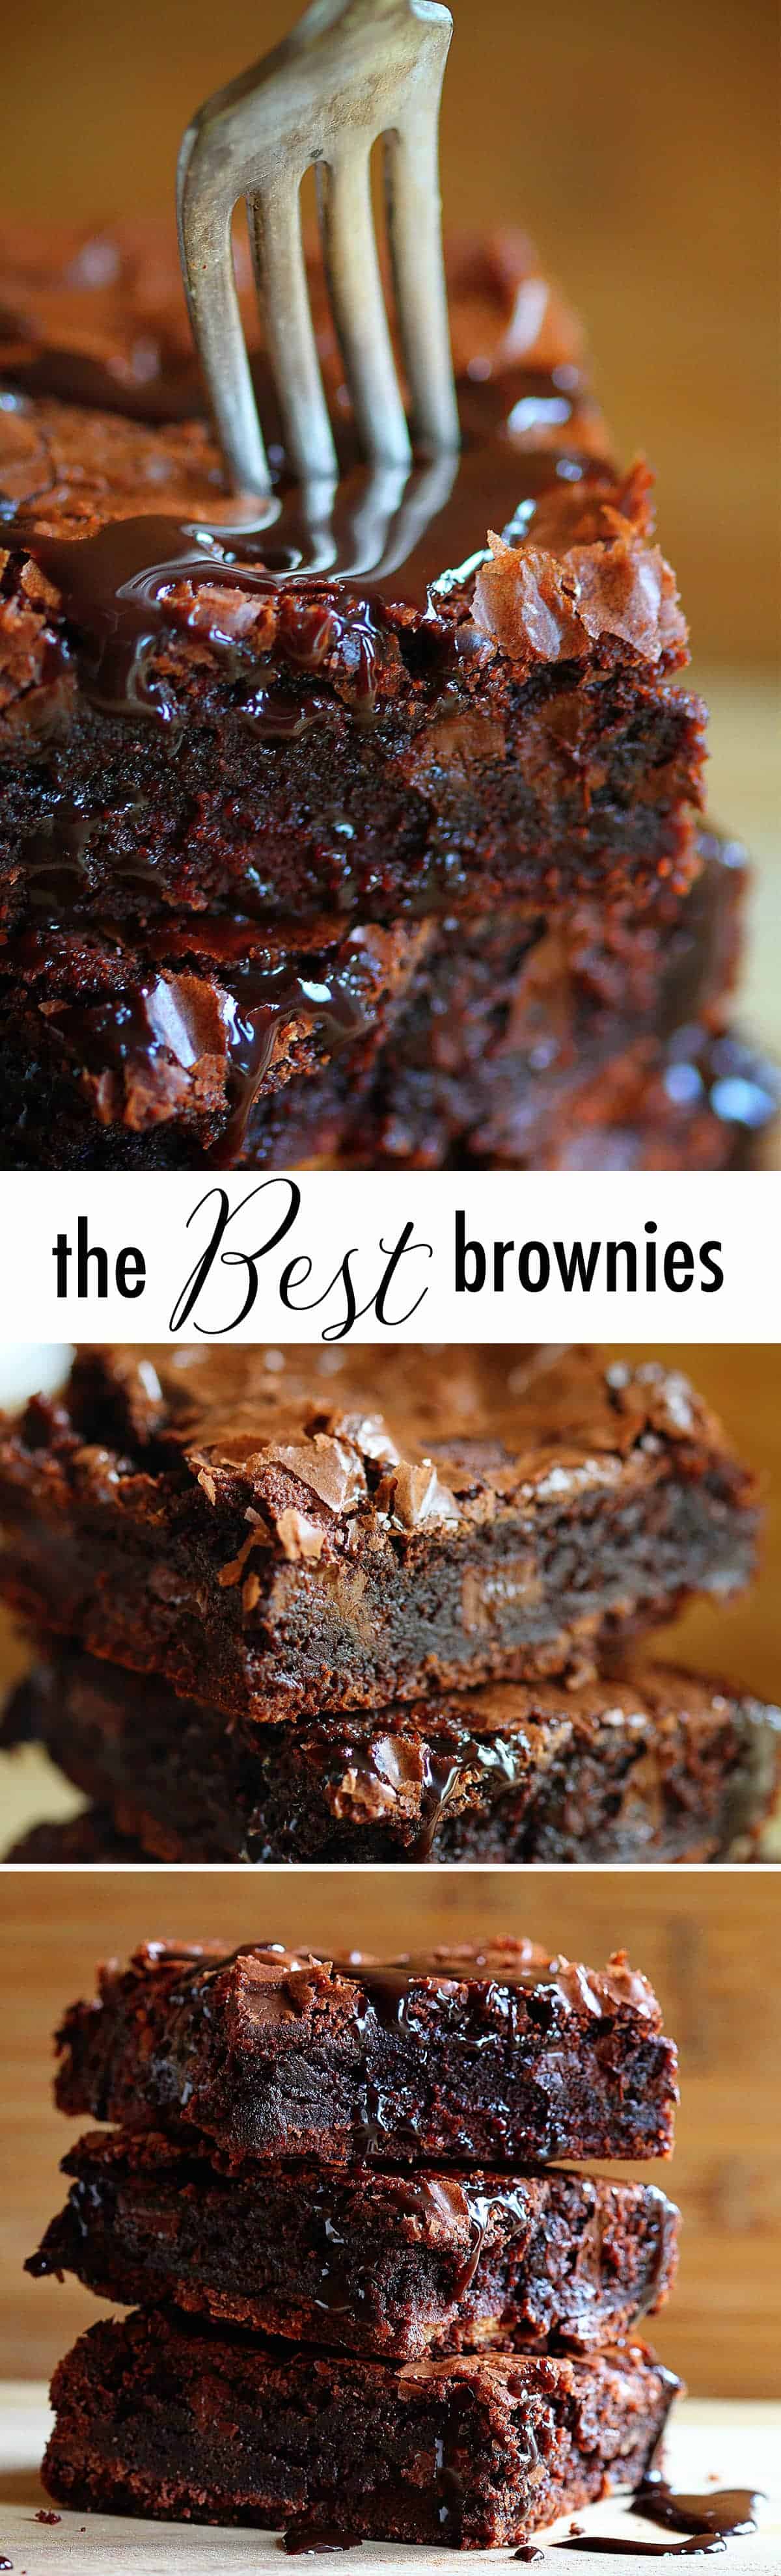 I have made these chocolate chocolate brownies and they ARE AMAZING!